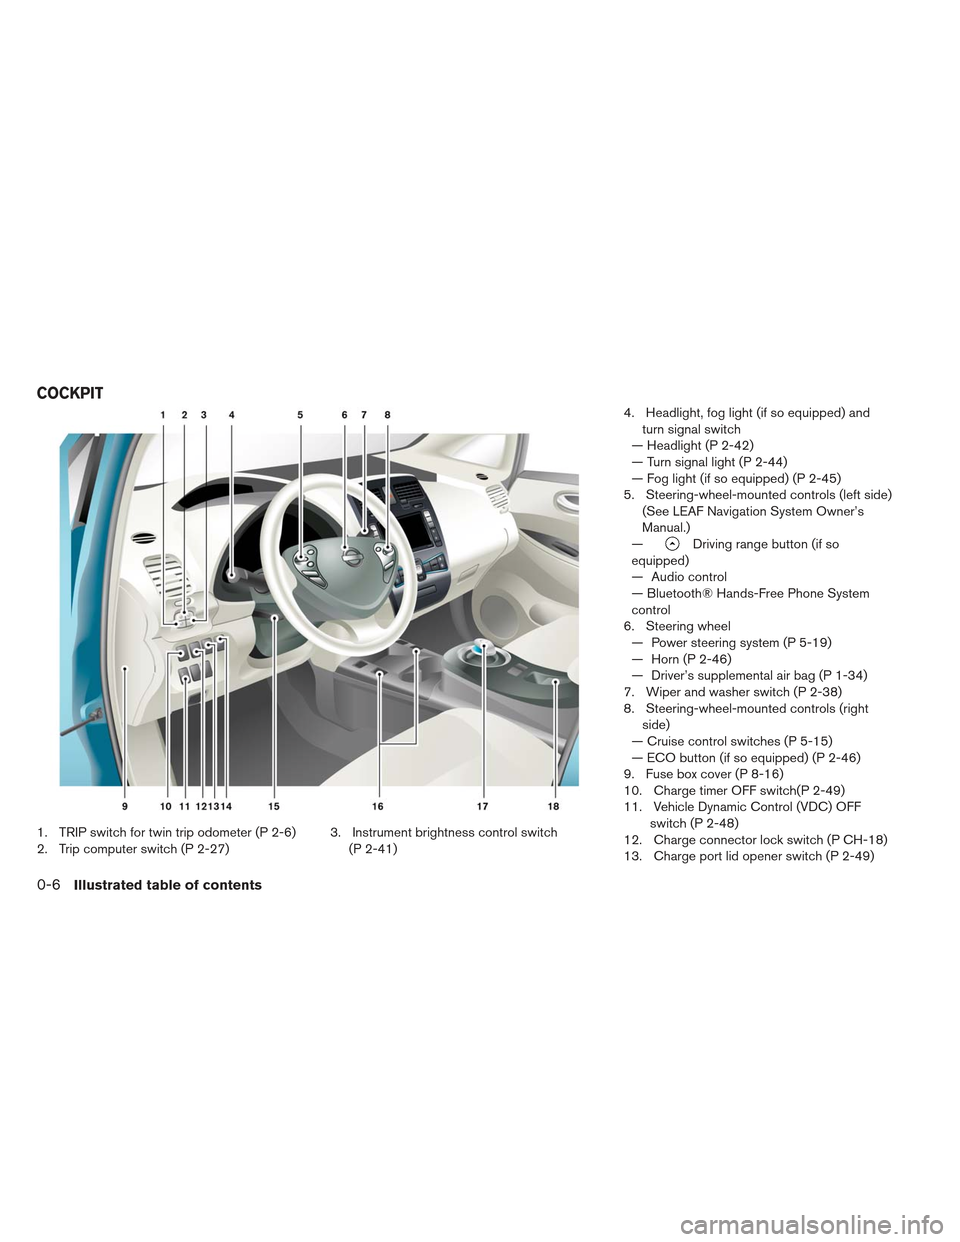 NISSAN LEAF 2013 1.G Owners Manual 1. TRIP switch for twin trip odometer (P 2-6)
2. Trip computer switch (P 2-27)3. Instrument brightness control switch
(P 2-41) 4. Headlight, fog light (if so equipped) and
turn signal switch
— Headl